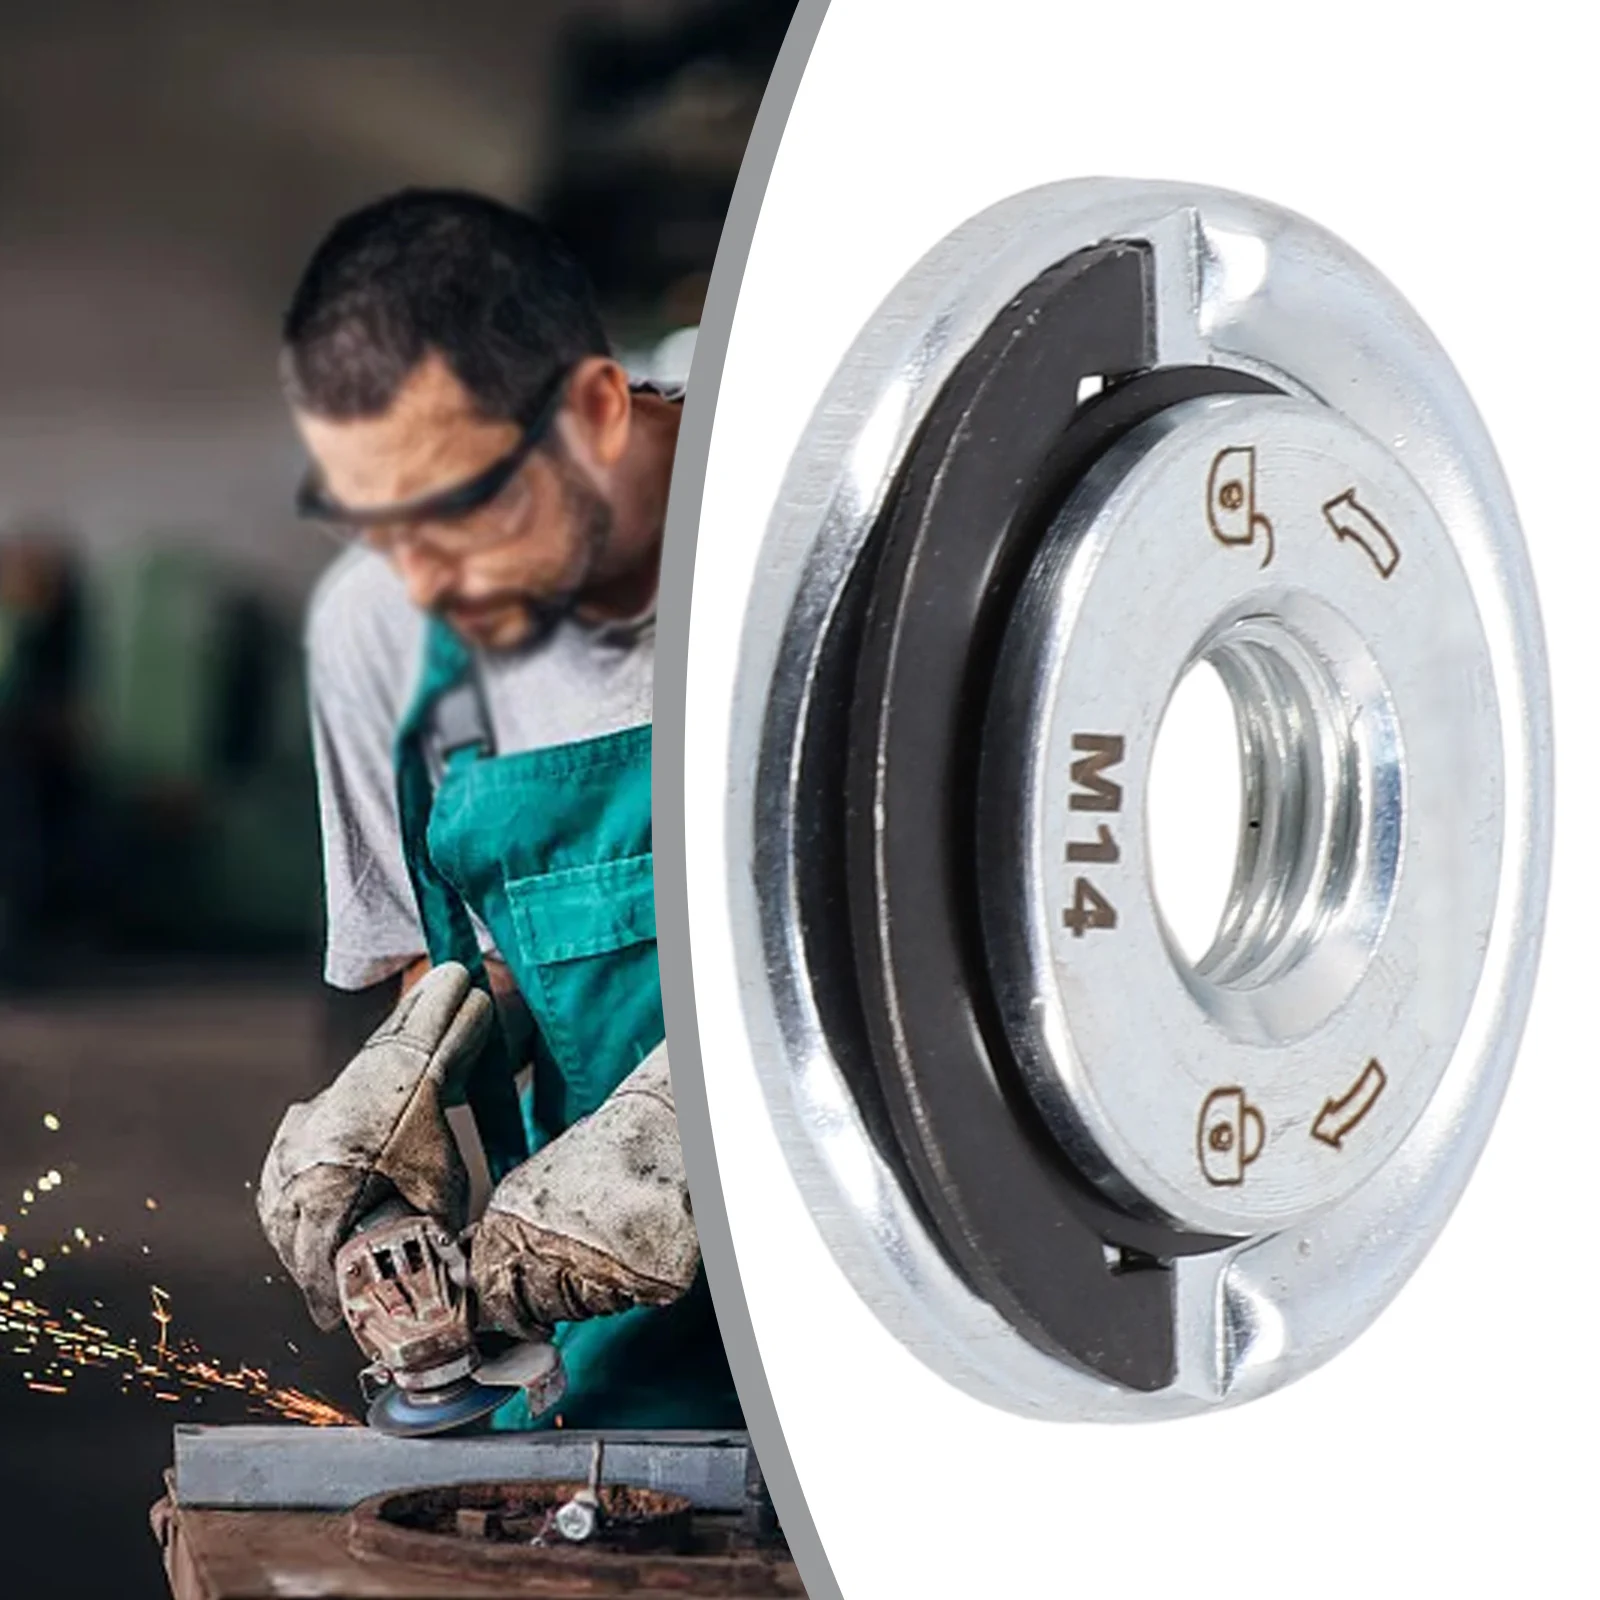 M14 SelfLocking Grinder Pressing Plate Flange Nut Improve Grinding Efficiency, Innovative Design, Easy to Install car radio frame 9 inch chery a3 2010 2012 stereo dvd player install surround trim panel kit face plate audio fascia bezel 2 din